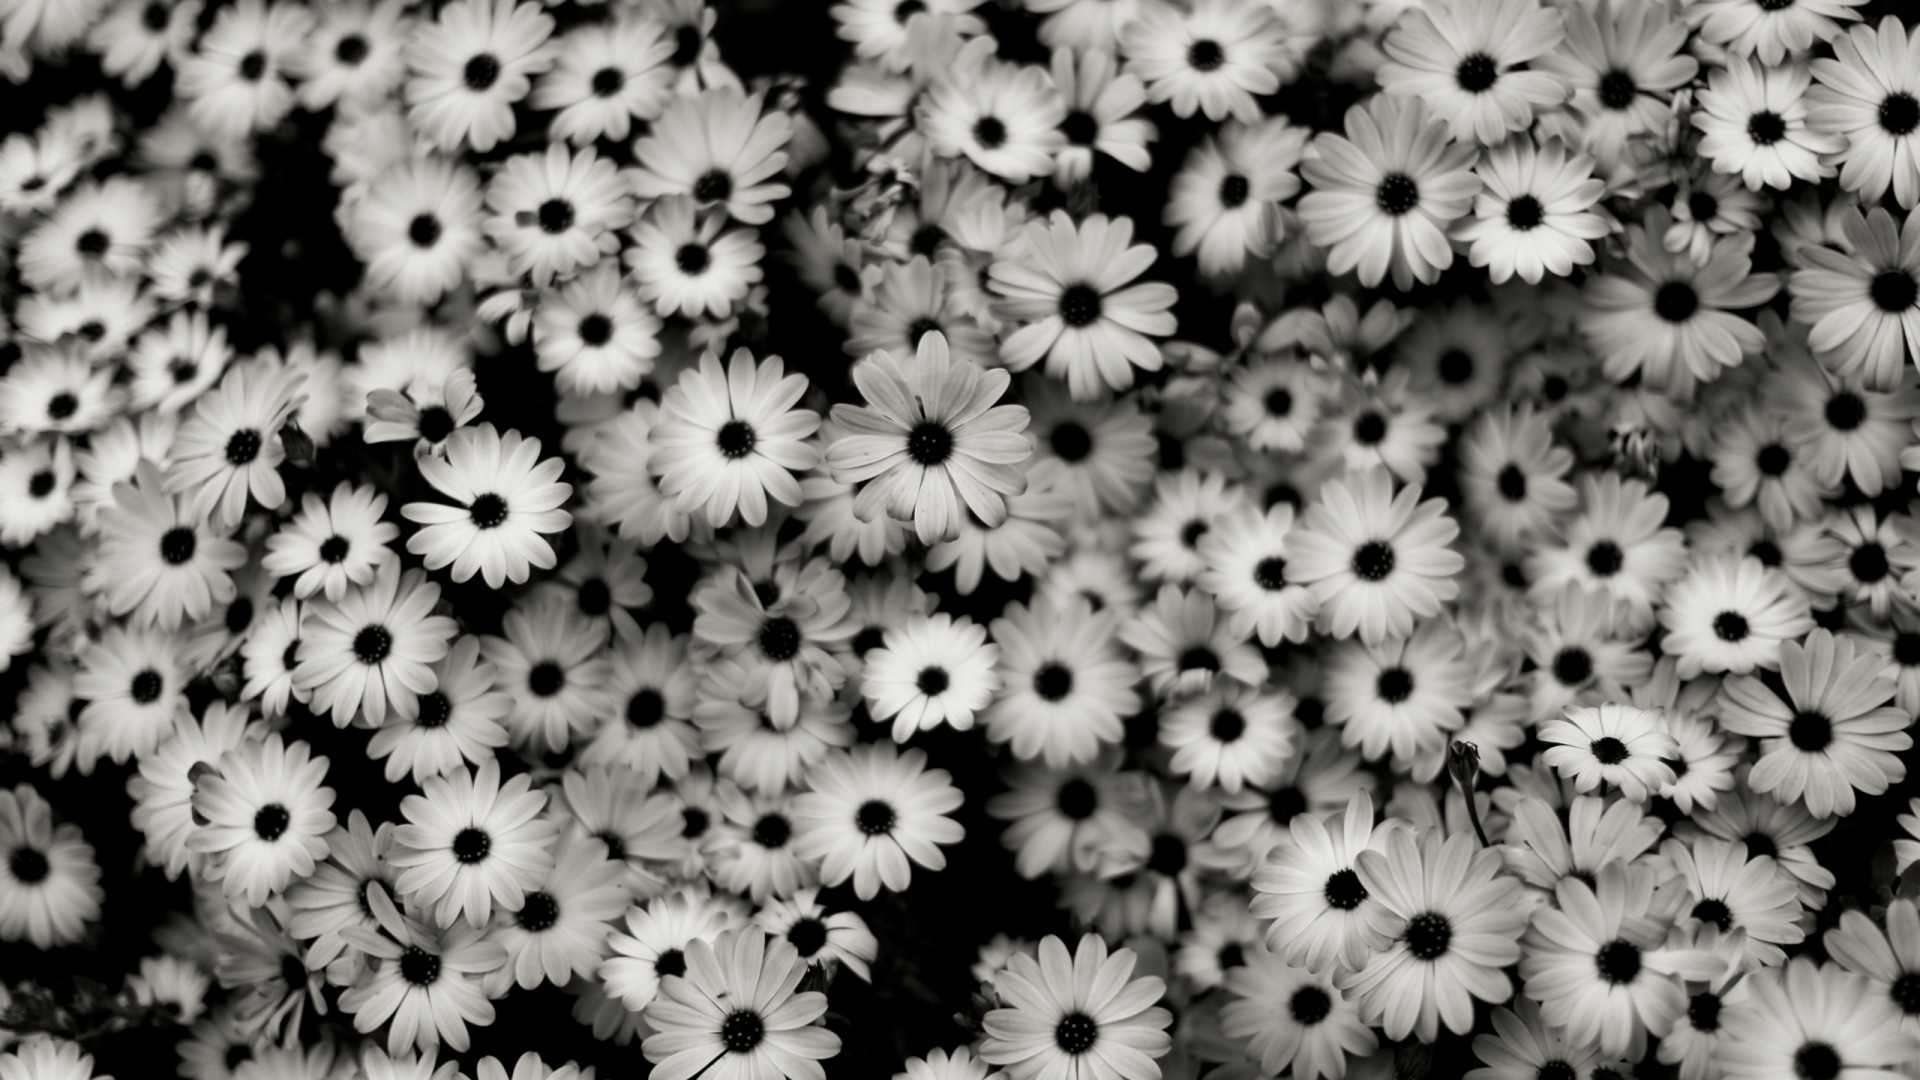 Black White Flowers Grey Daisies Wallpaper   MixHD wallpapers